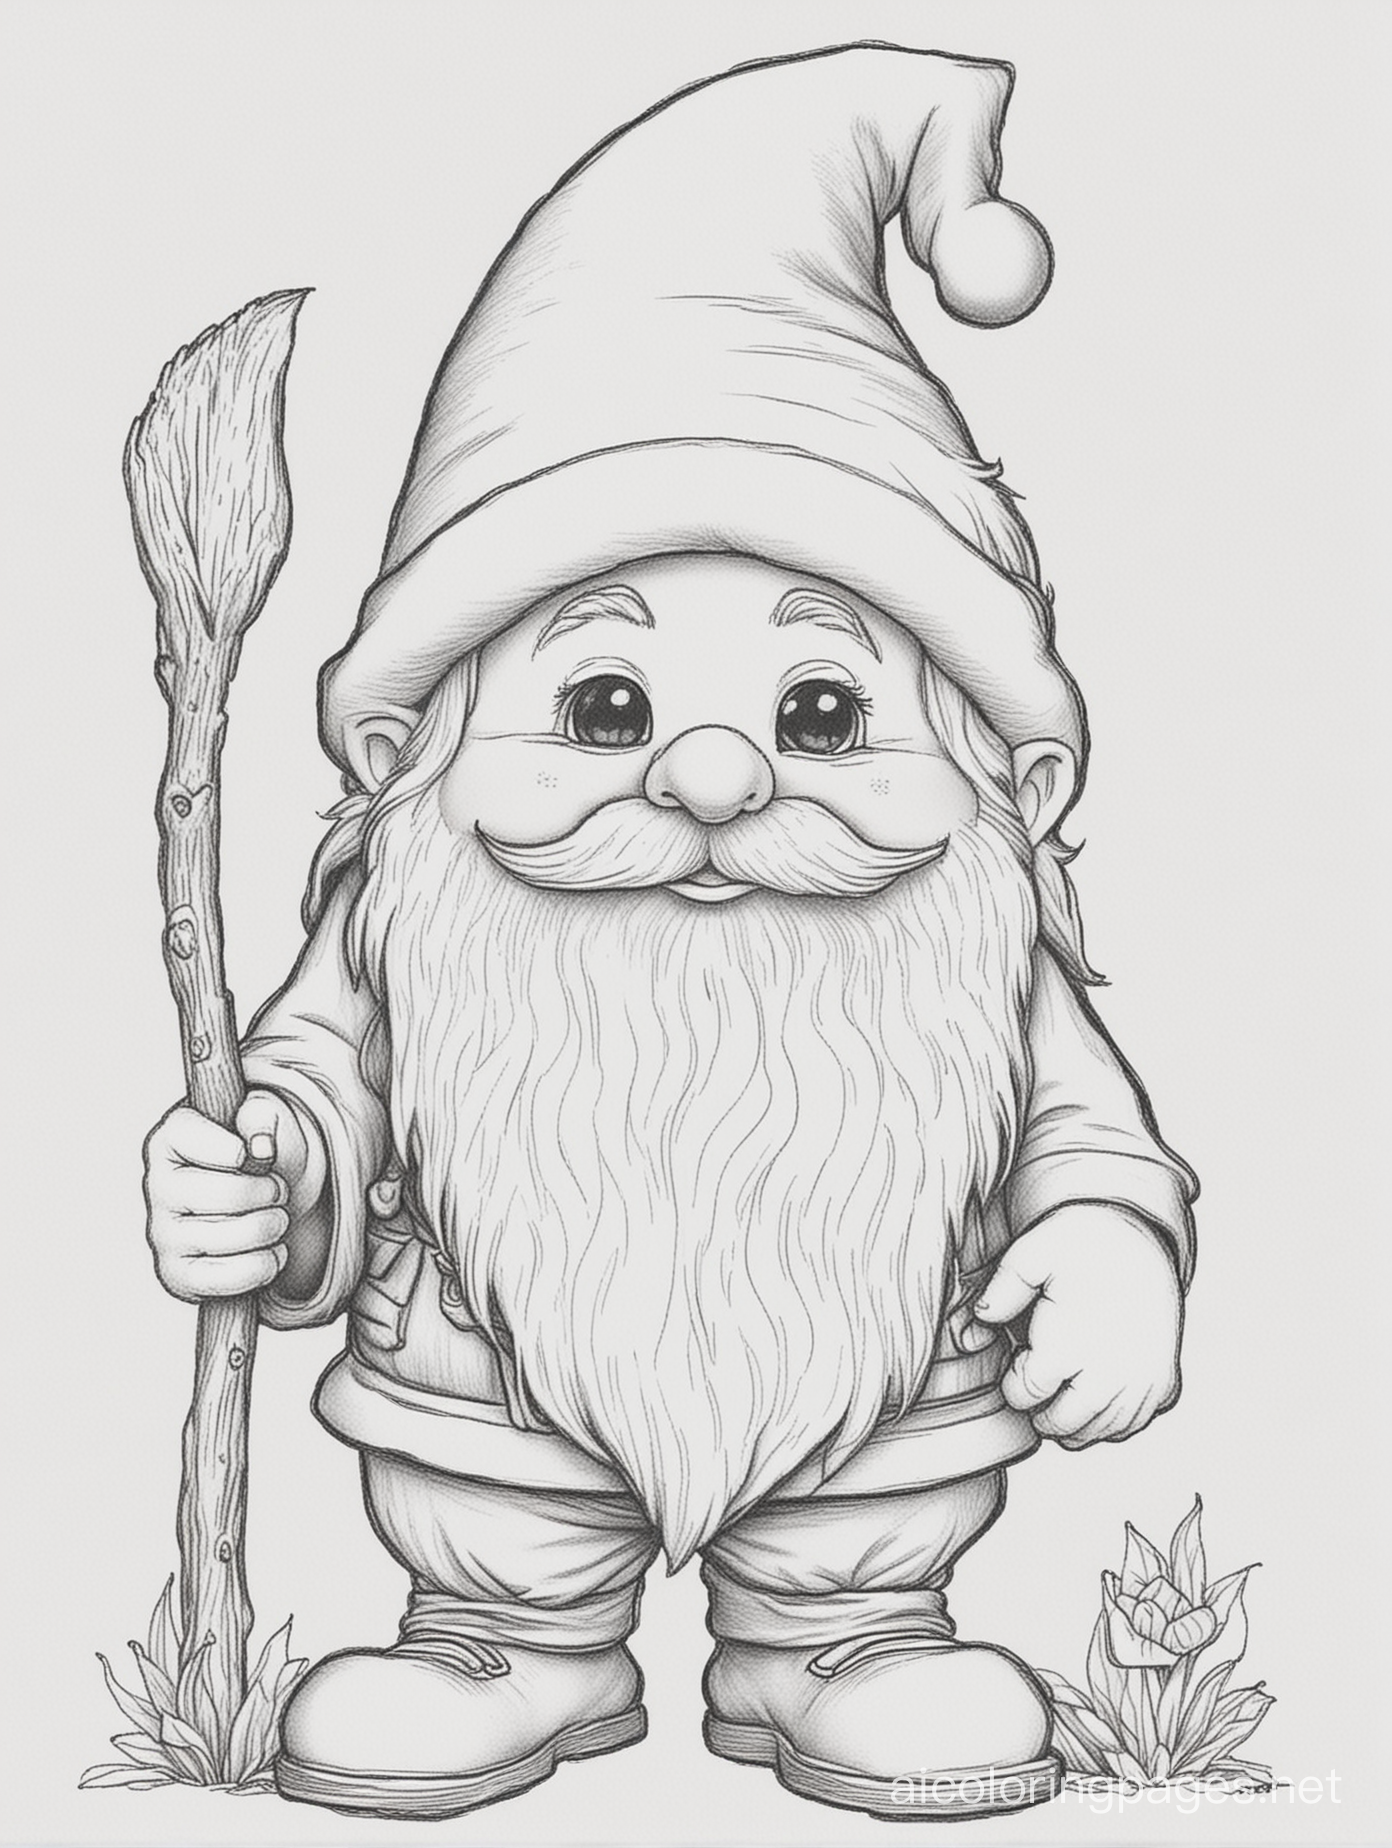 gnome, Coloring Page, black and white, line art, white background, Simplicity, Ample White Space. The background of the coloring page is plain white to make it easy for young children to color within the lines. The outlines of all the subjects are easy to distinguish, making it simple for kids to color without too much difficulty